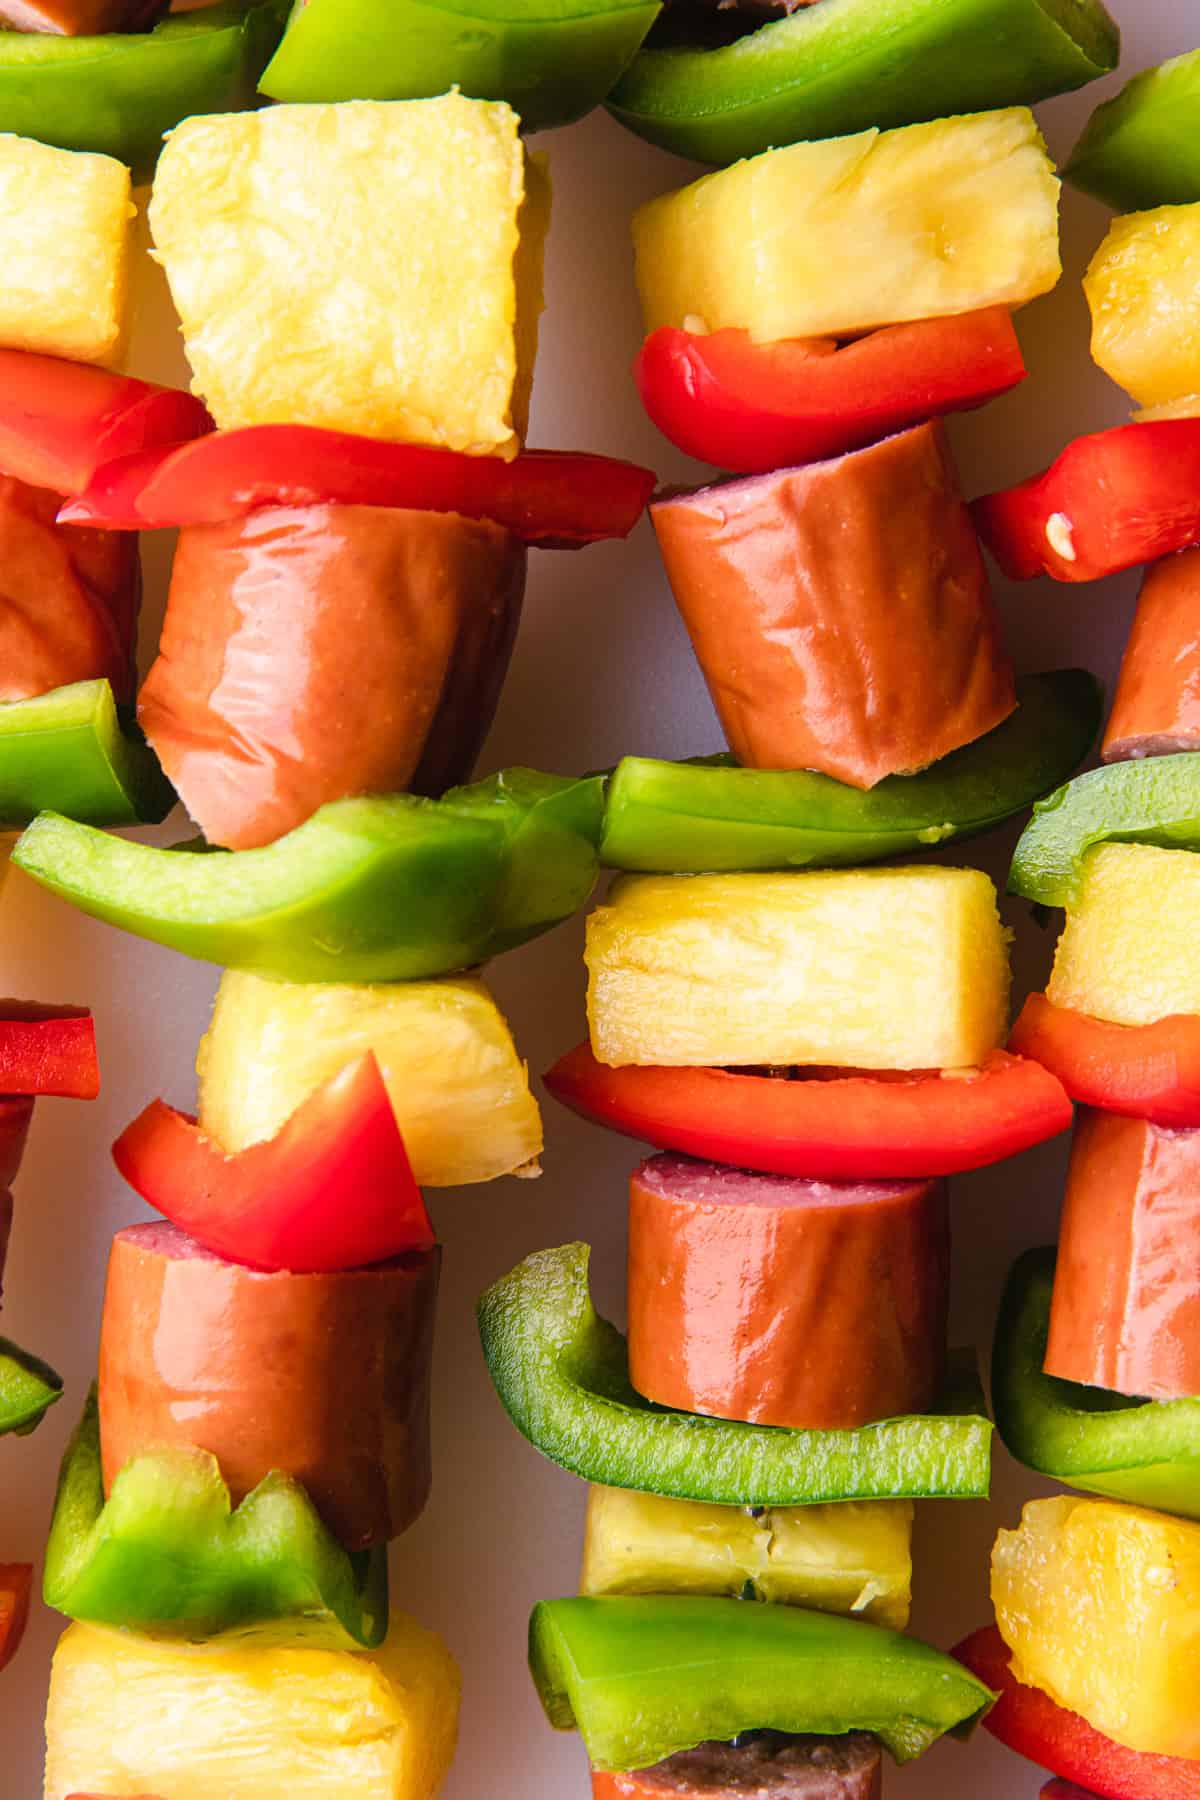 Smoked Sausage Kebobs with Summer Vegetables - Pillers